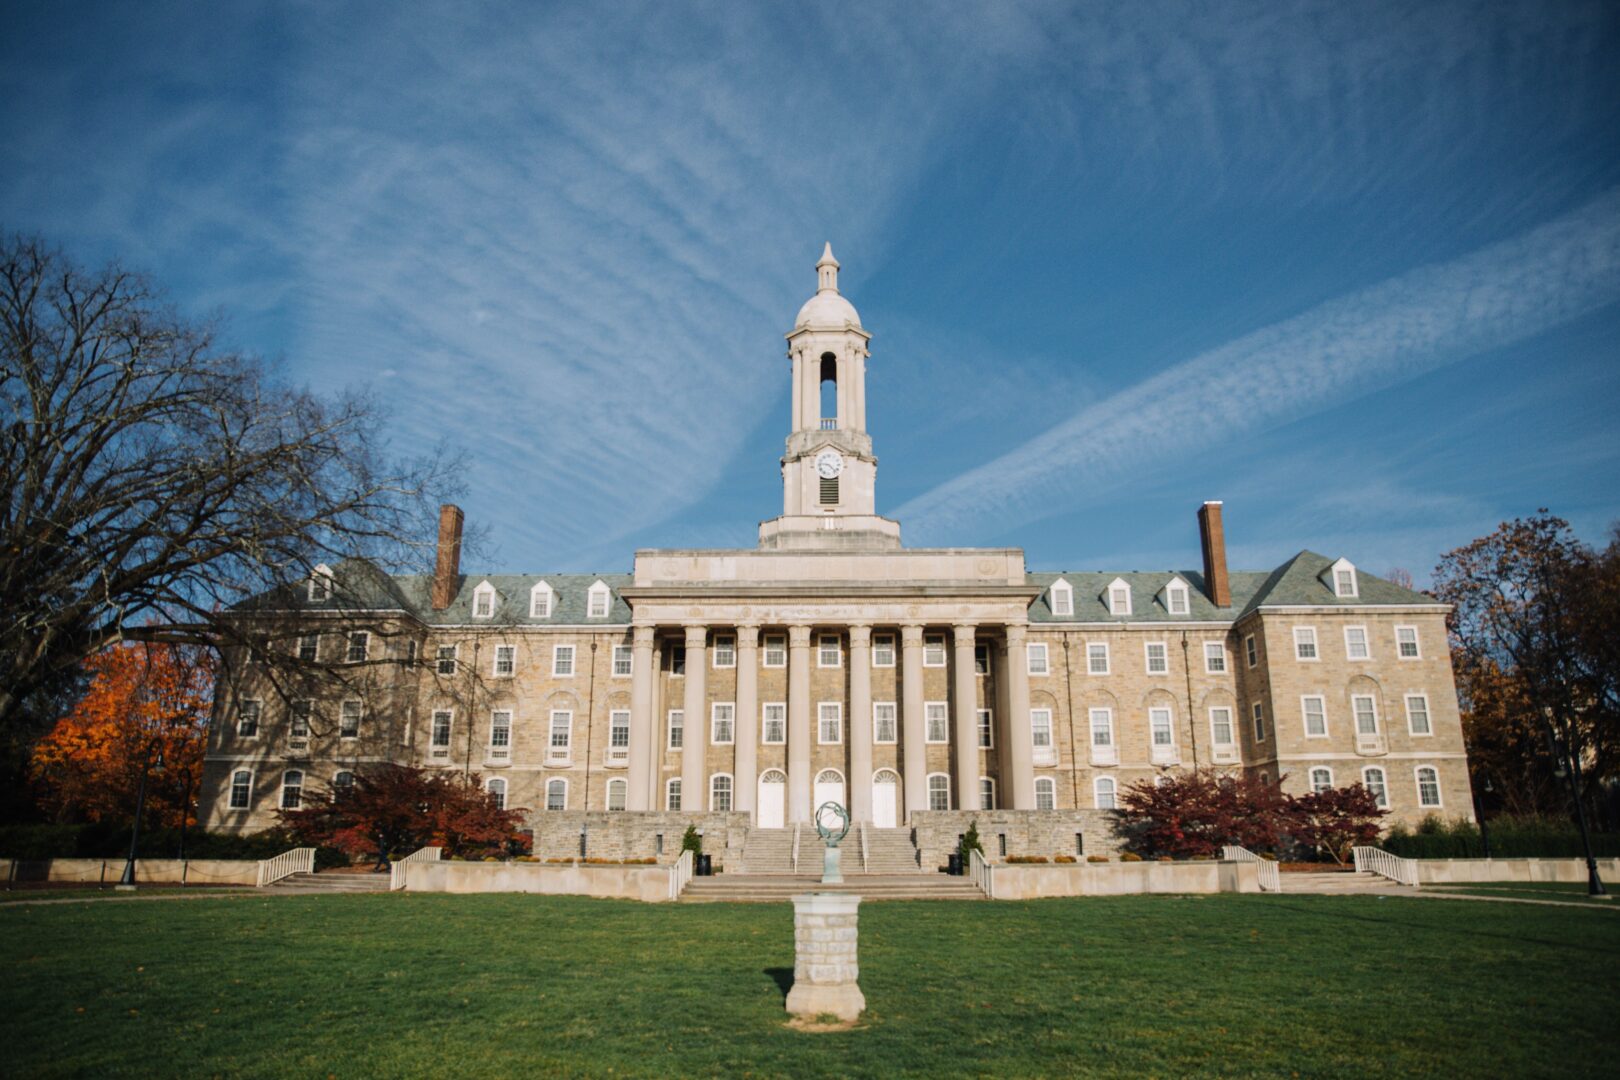 In private conversations, trustees balked at Penn State leadership’s initial budget proposal last year, which included a $245 million budget deficit.